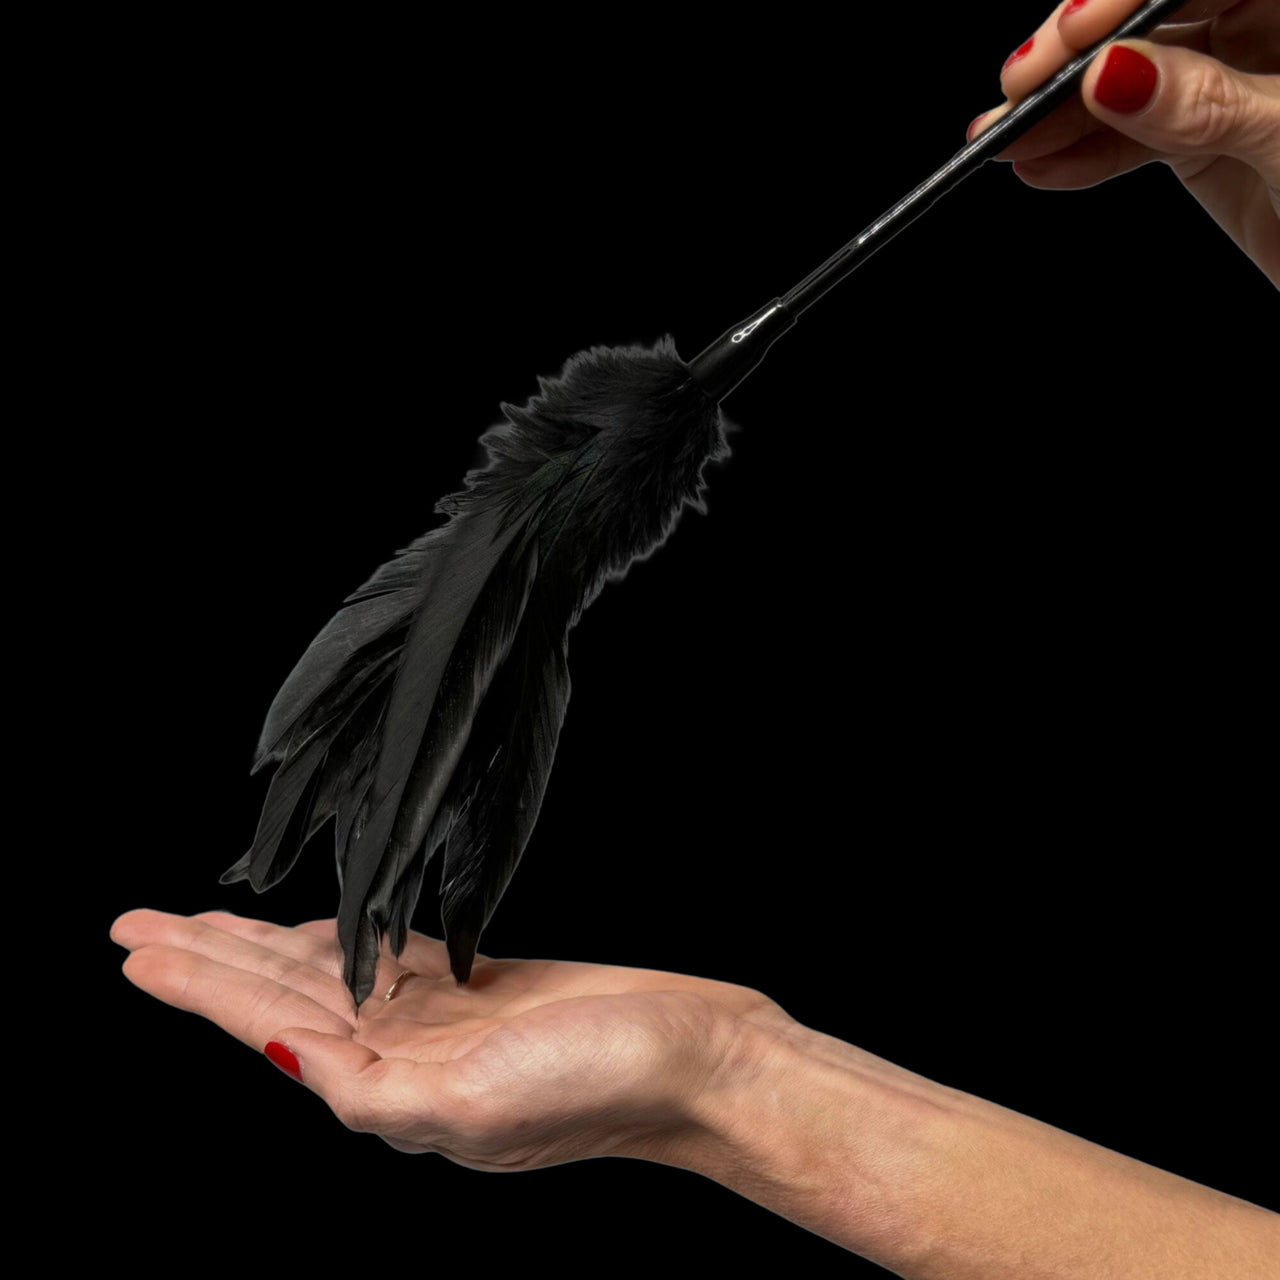 Dual Delight Black Feather & Leather Crop – Elegant Sensory Accessory for Playful Stimulation